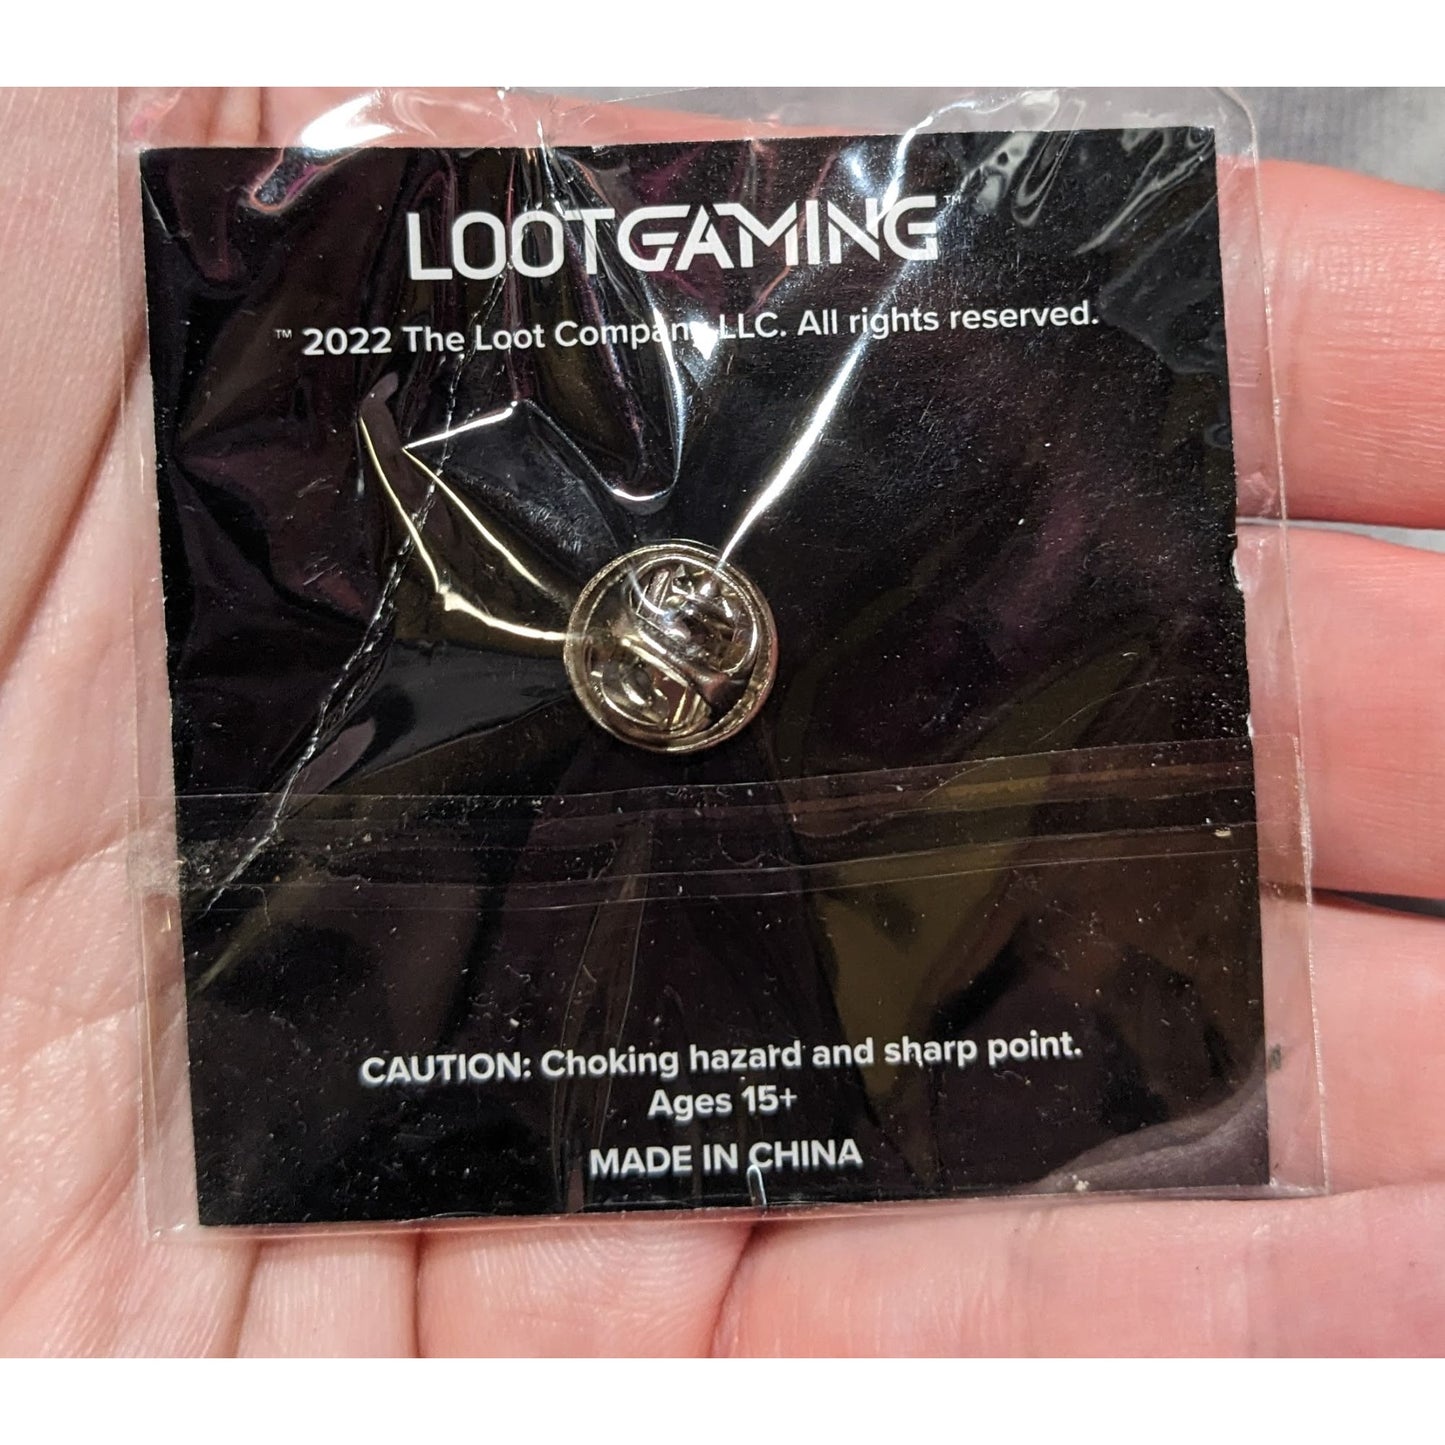 Minecraft Lootgaming Collectible Pin